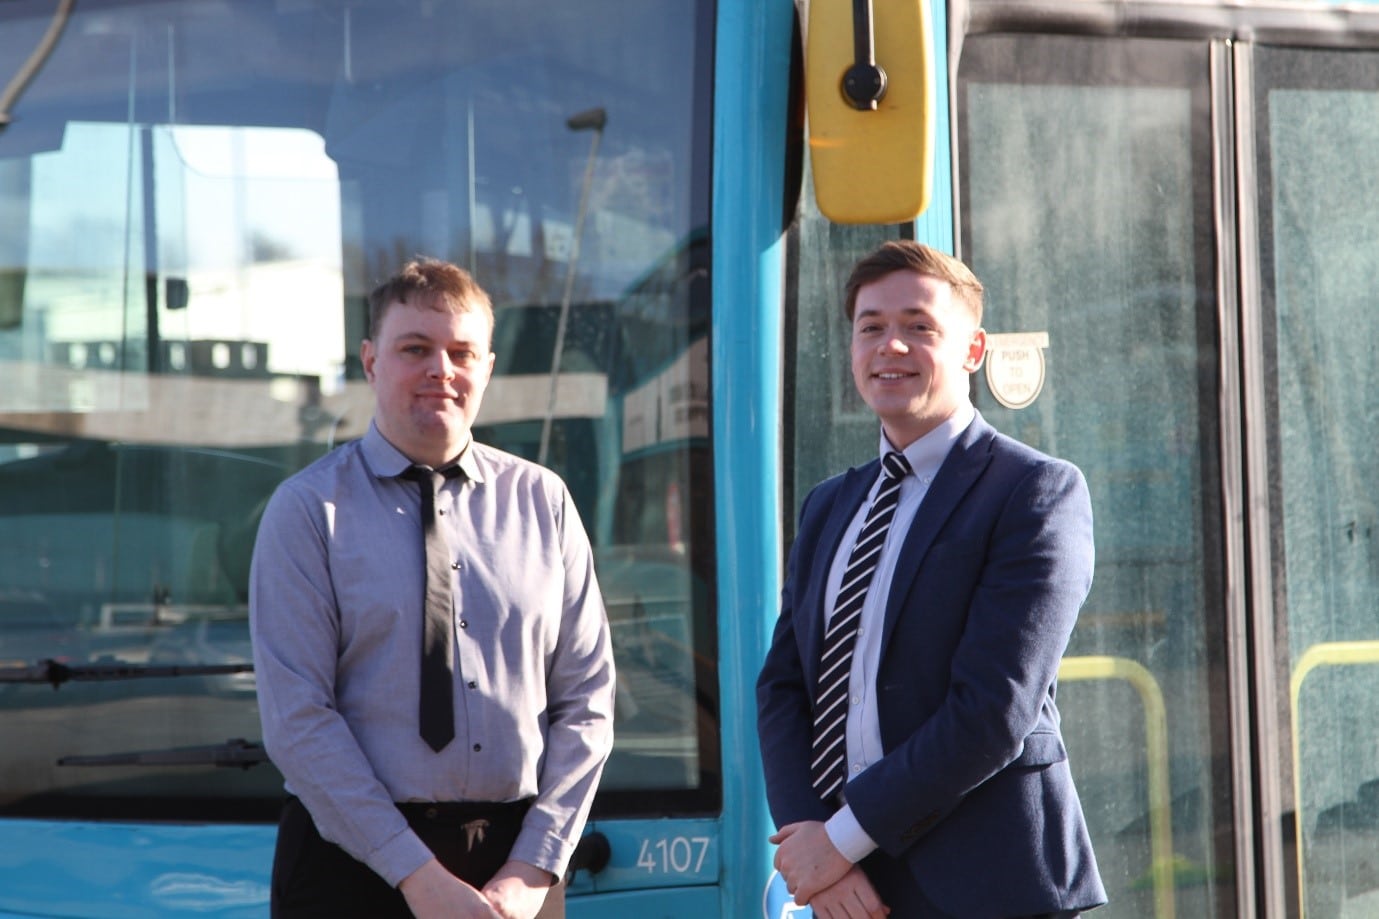 Arriva Midlands Network Manager appointments Ryan Charlton and Matt King